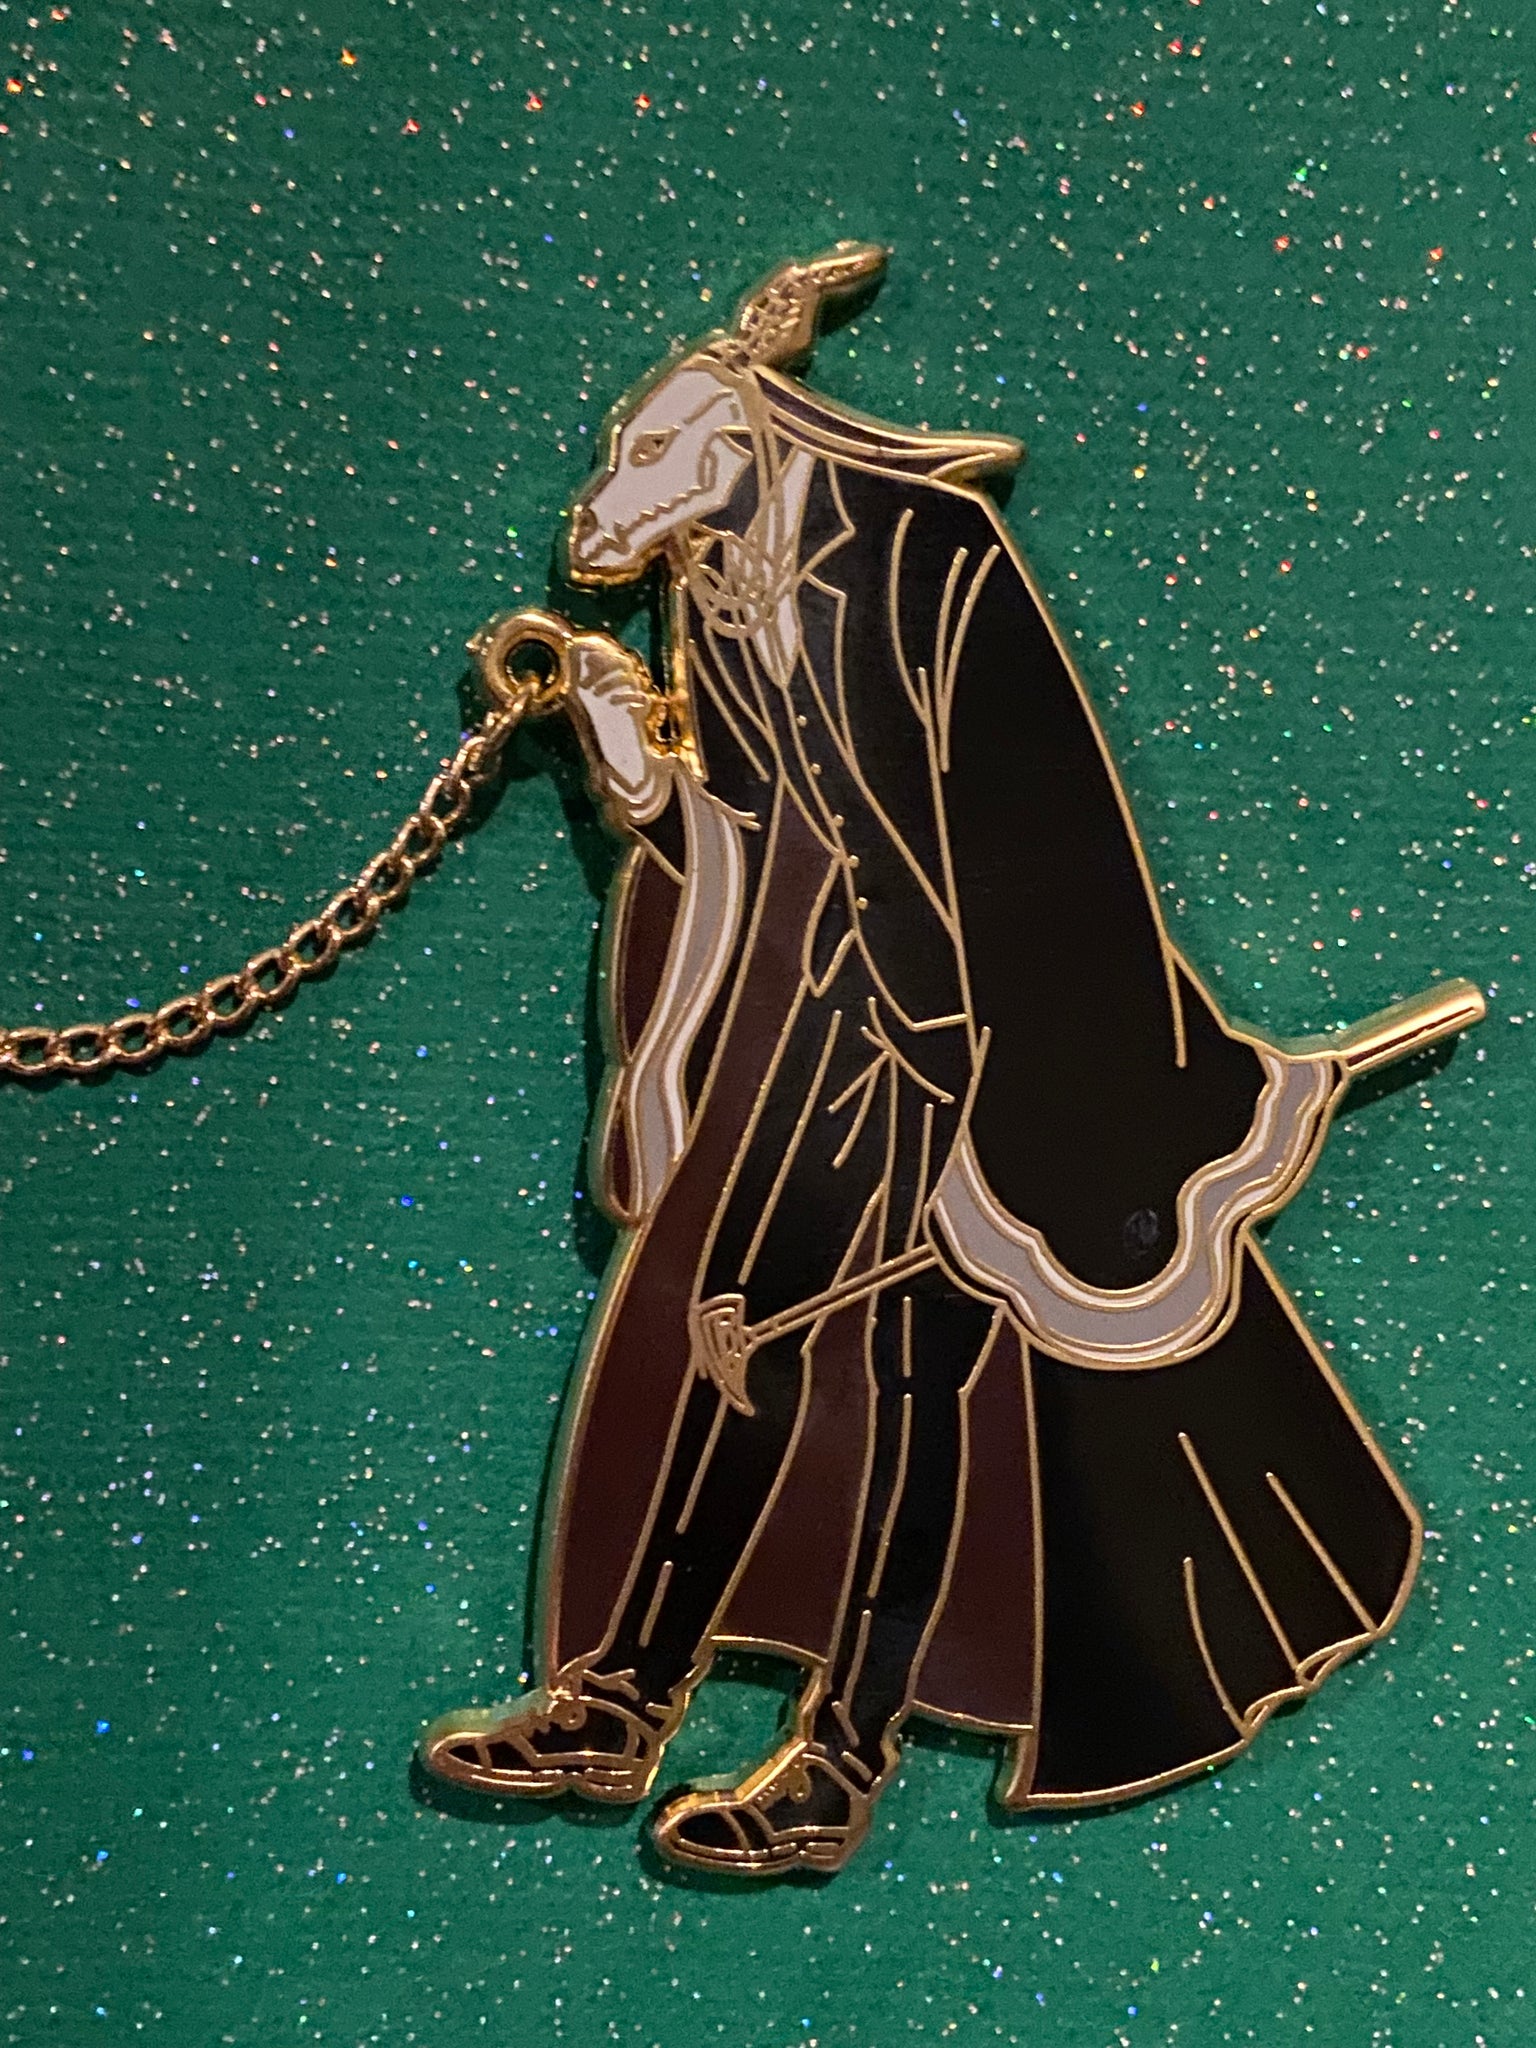 CDJapan : The Ancient Magus' Bride Season 2 Slide Acrylic Key Chain (With  Pedestal) C Collectible